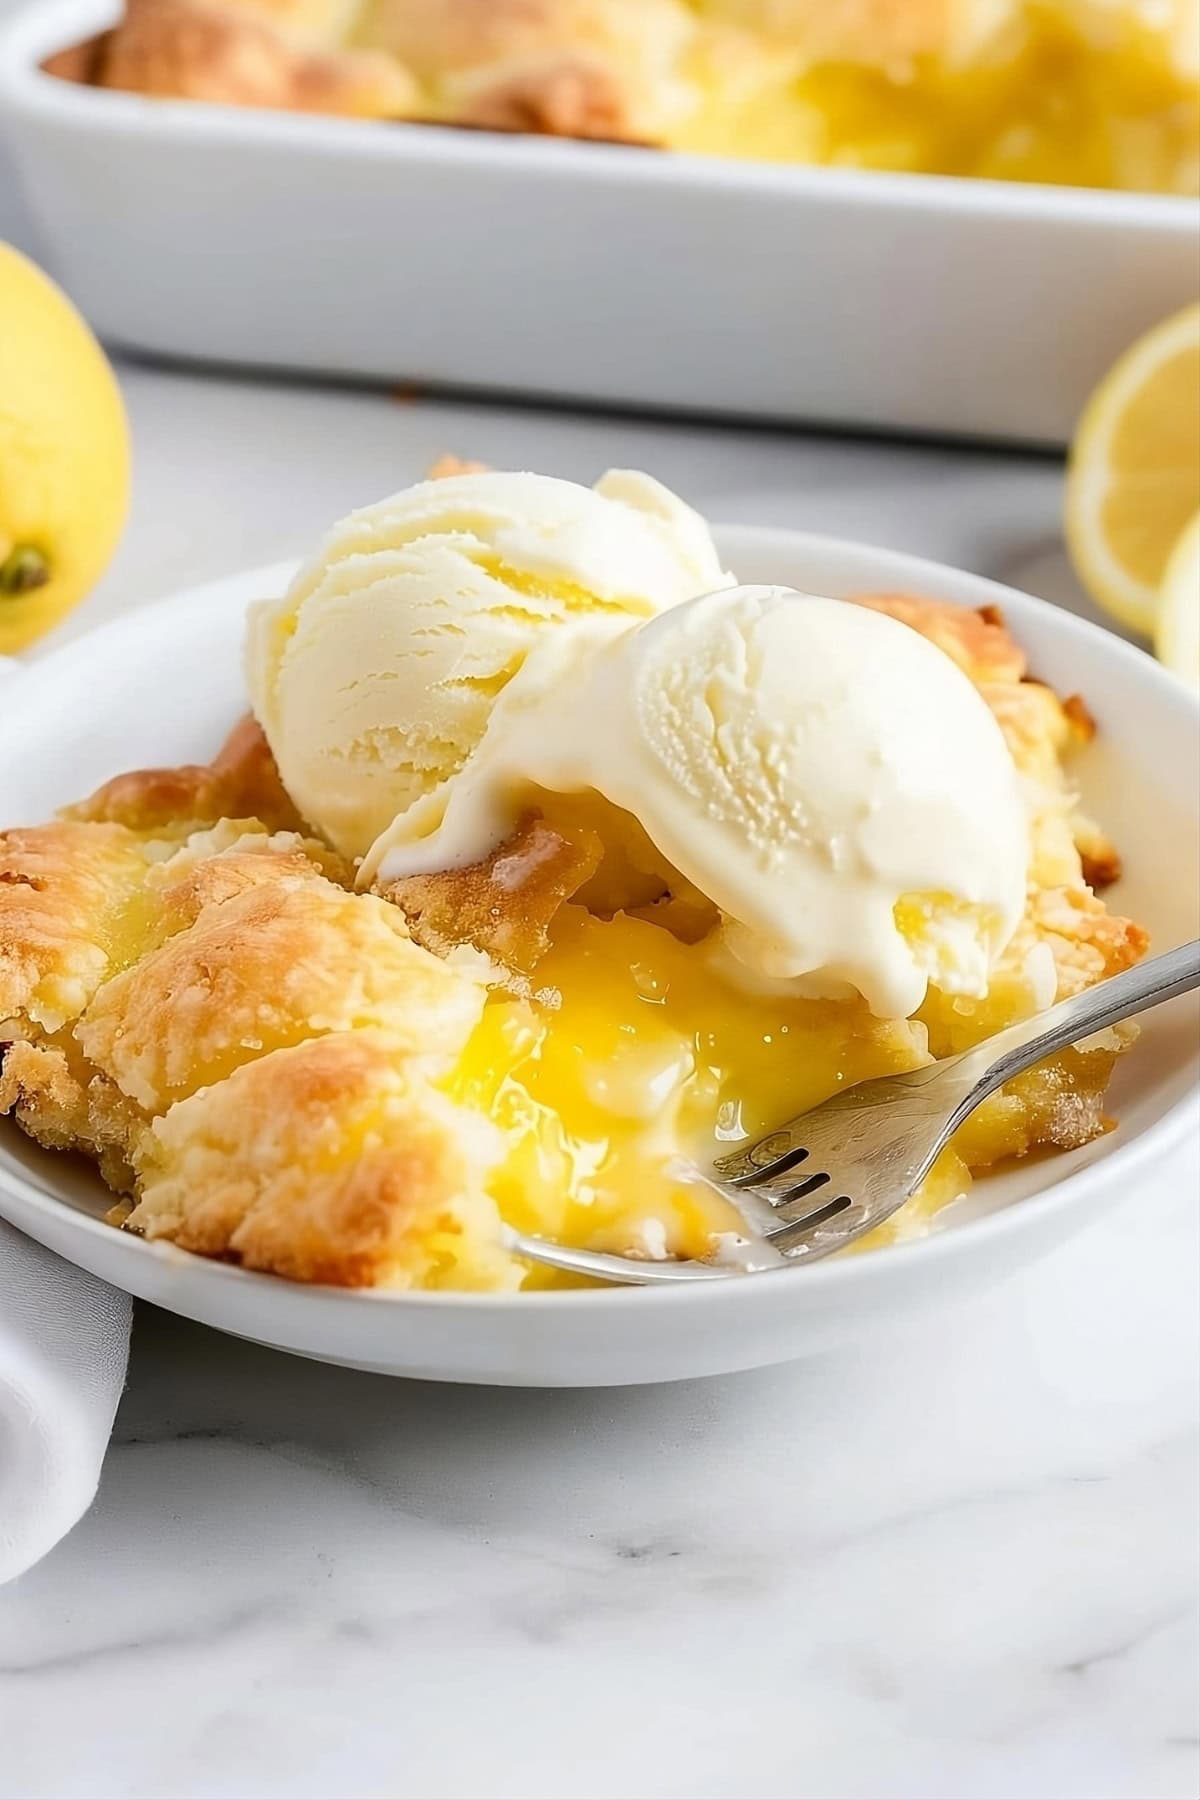 Lemon cobbler serving in a white plate garnished with two scoops of vanilla ice cream.